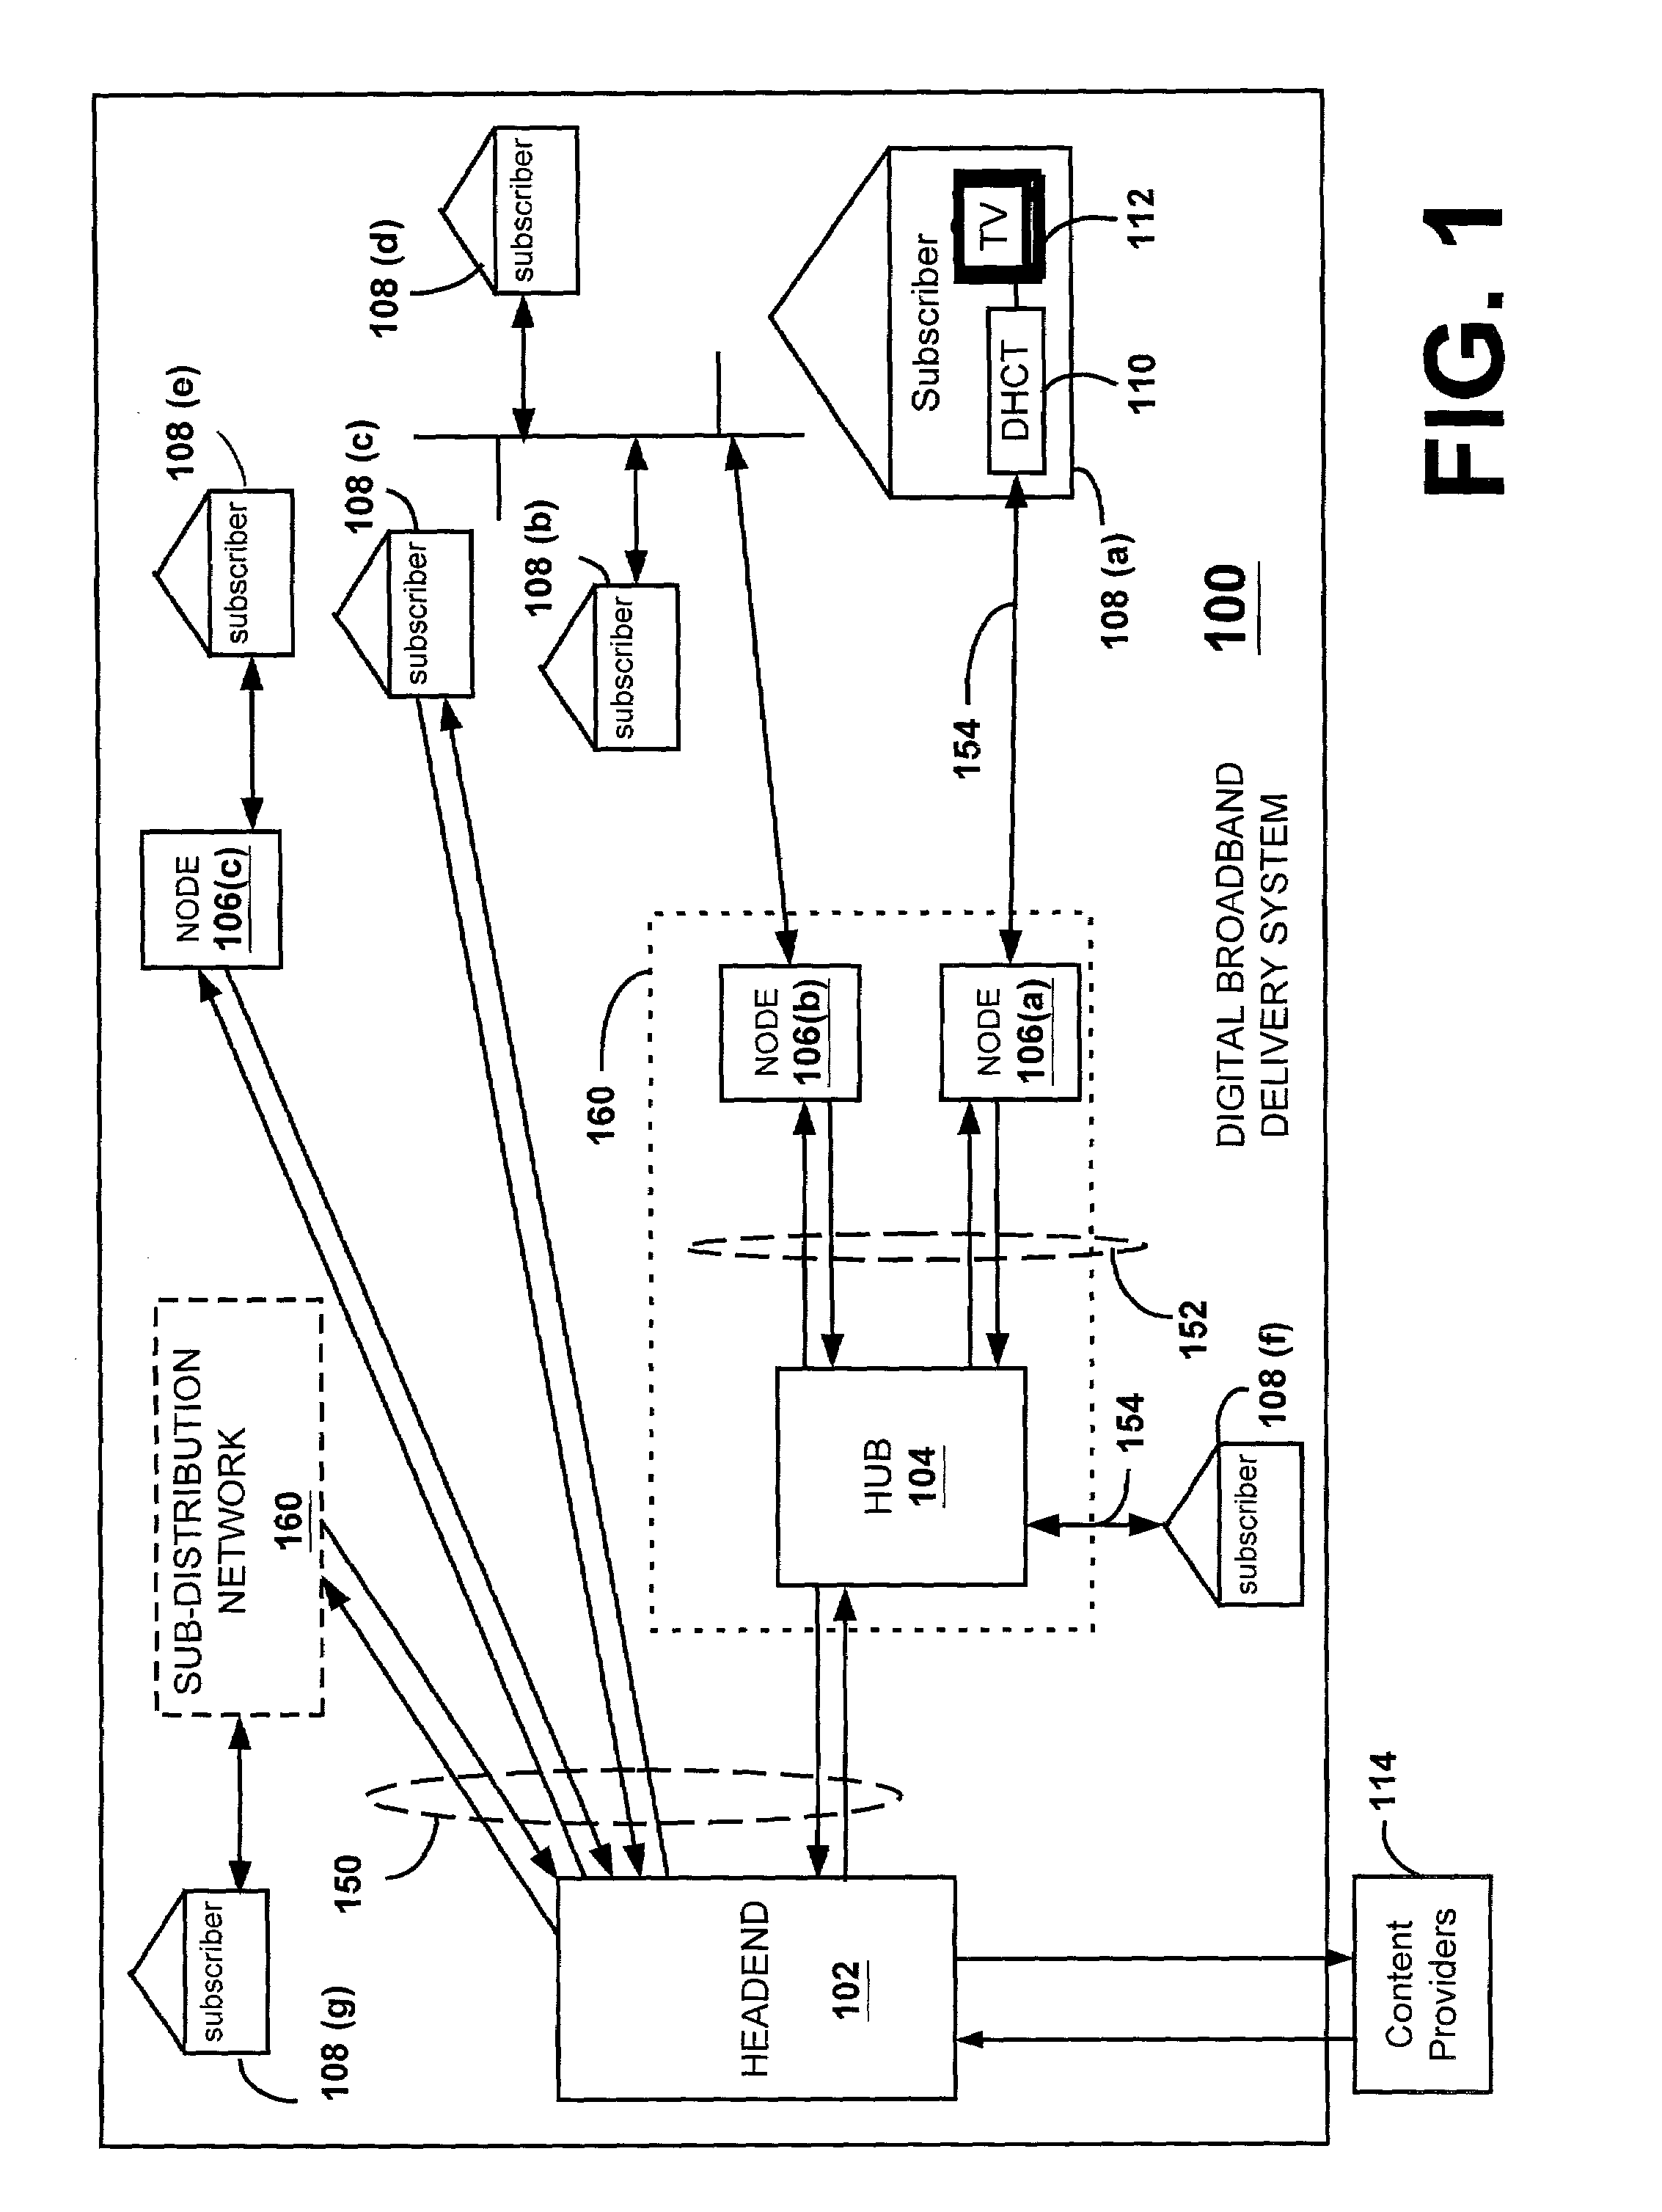 In a subscriber network receiving digital packets and transmitting digital packets below a predetermined maximum bit rate